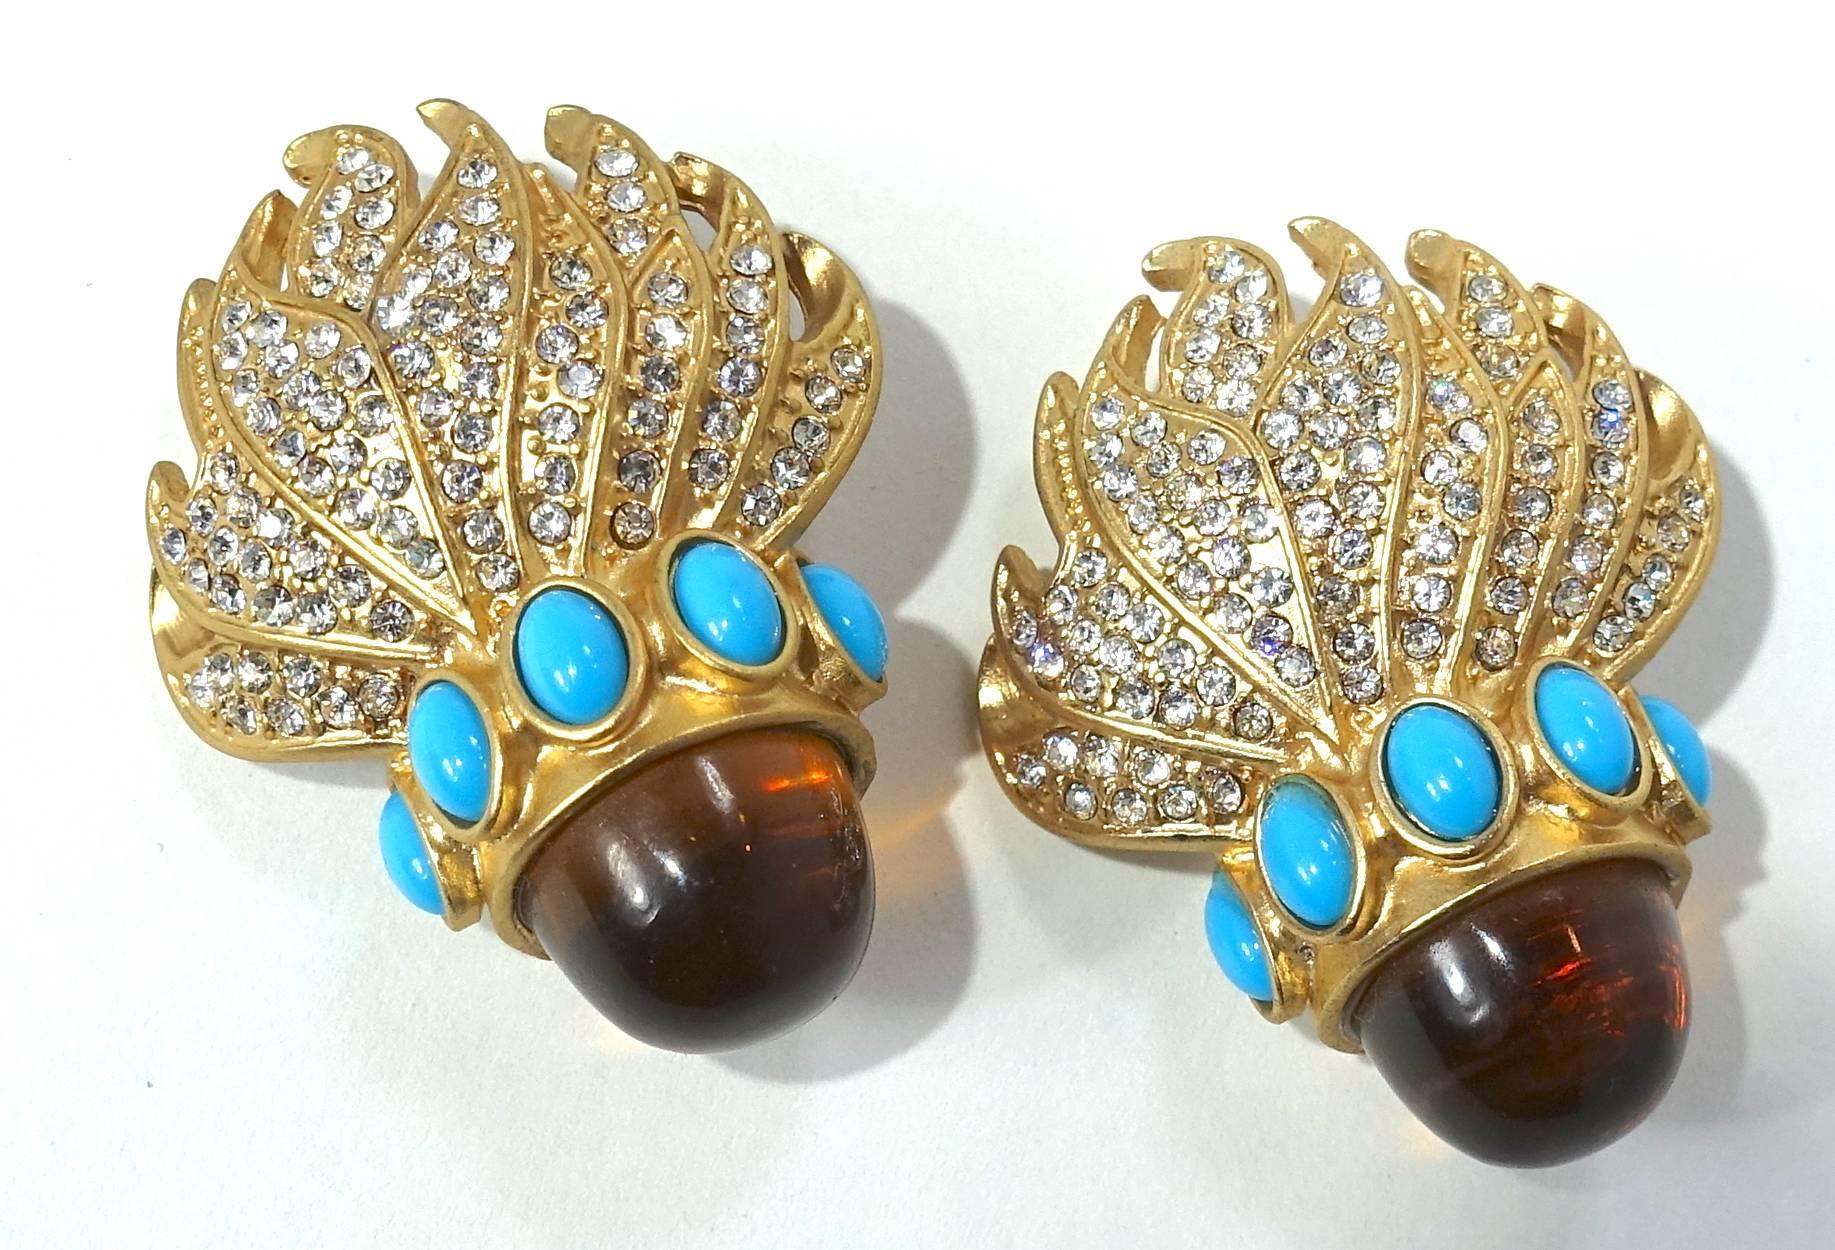 These vintage 1960’s earrings have a large faux topaz bullet shape with turquoise and rhinestone accents in a gold tone setting.  The earrings are glitzy but we toned down the photo so you could see the details.  These clip earrings measure 1-3/4” x